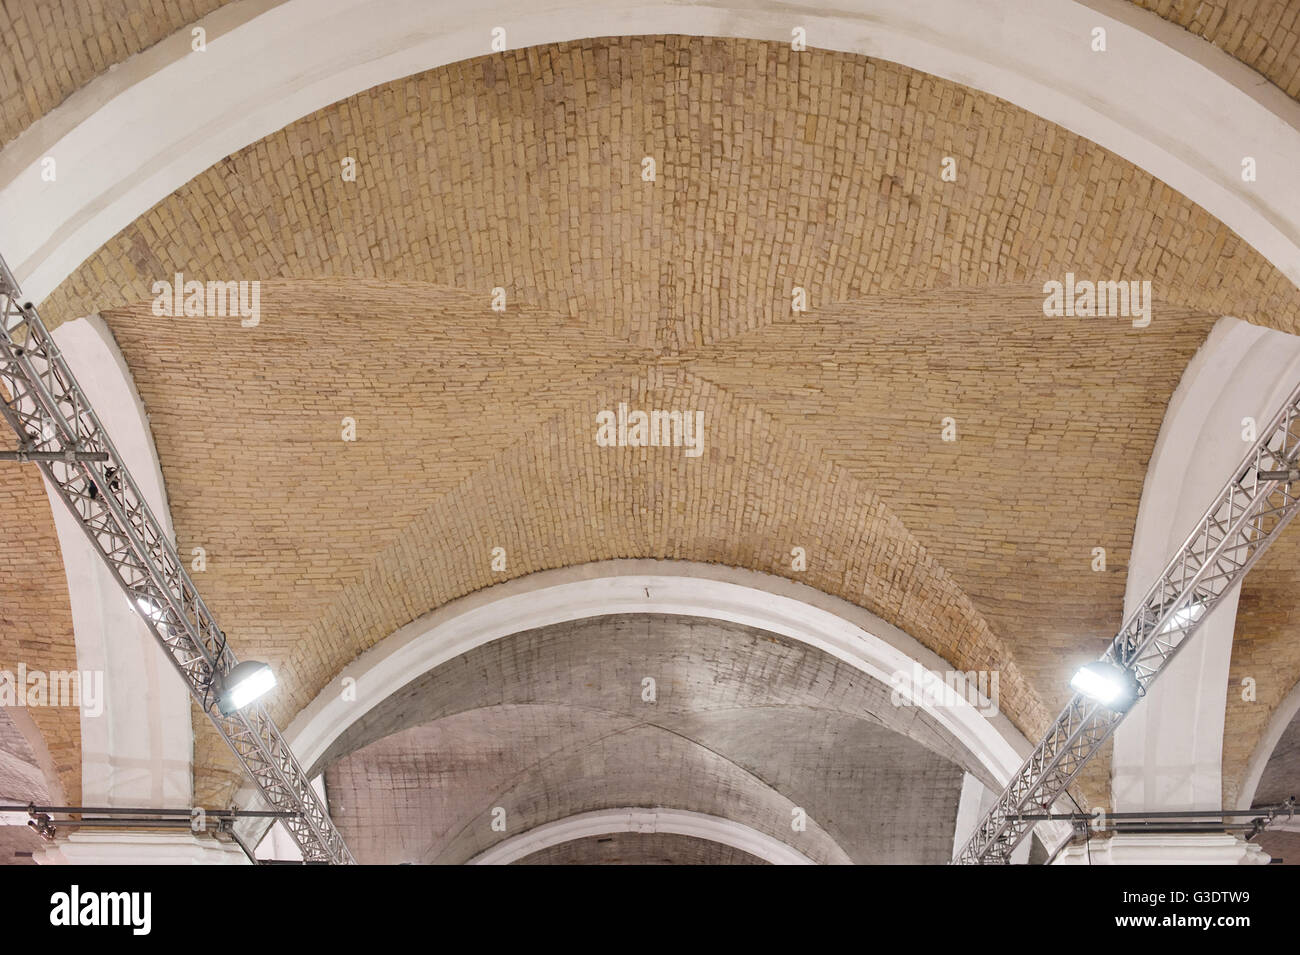 brick lancet arch ceiling in the fortress Stock Photo